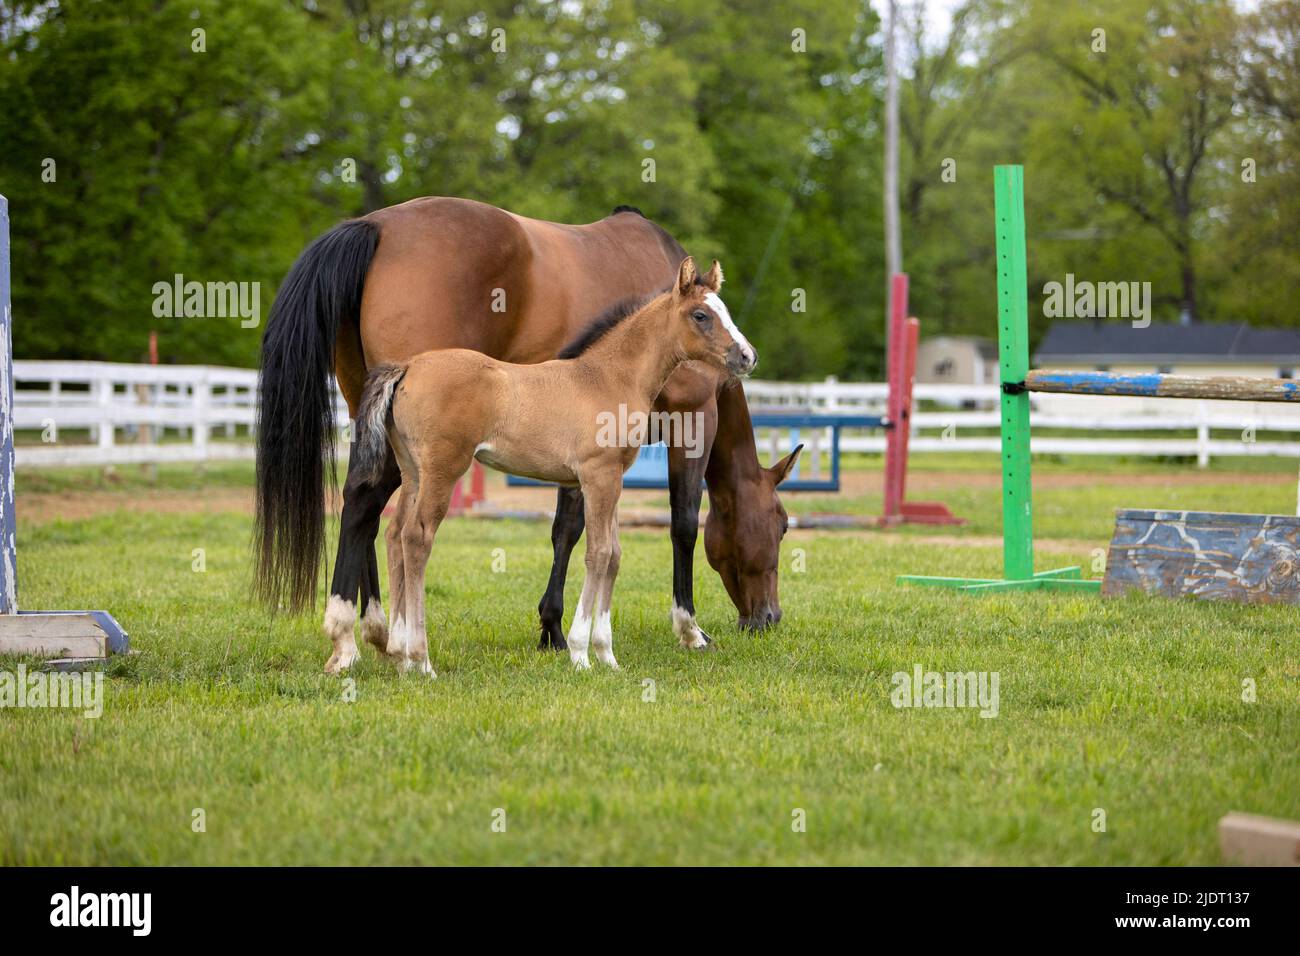 A foal standing next to a horse grazing in an outdoor riding arena. Stock Photo